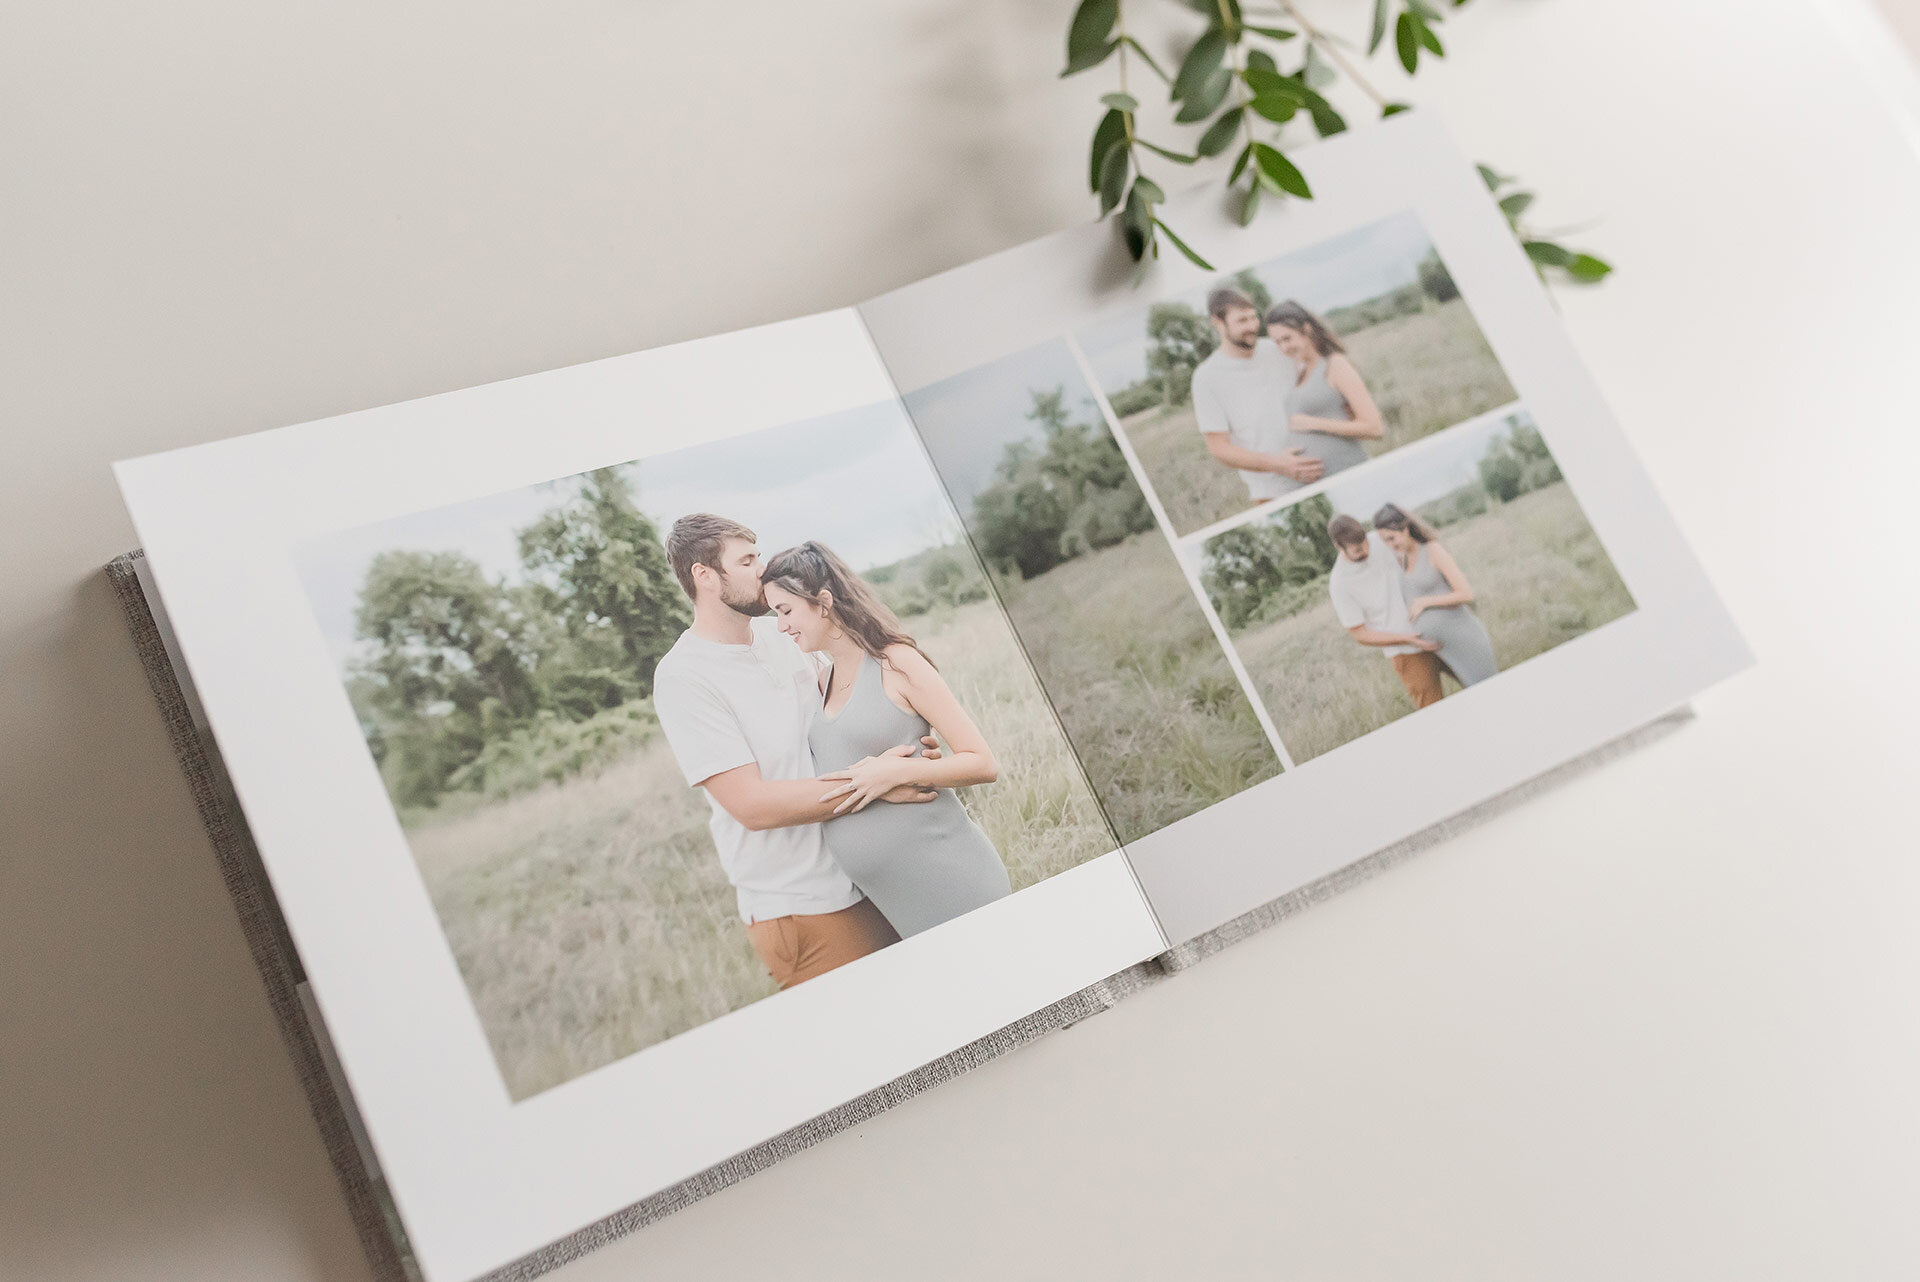 maternity photo albums made in canada (Copy)